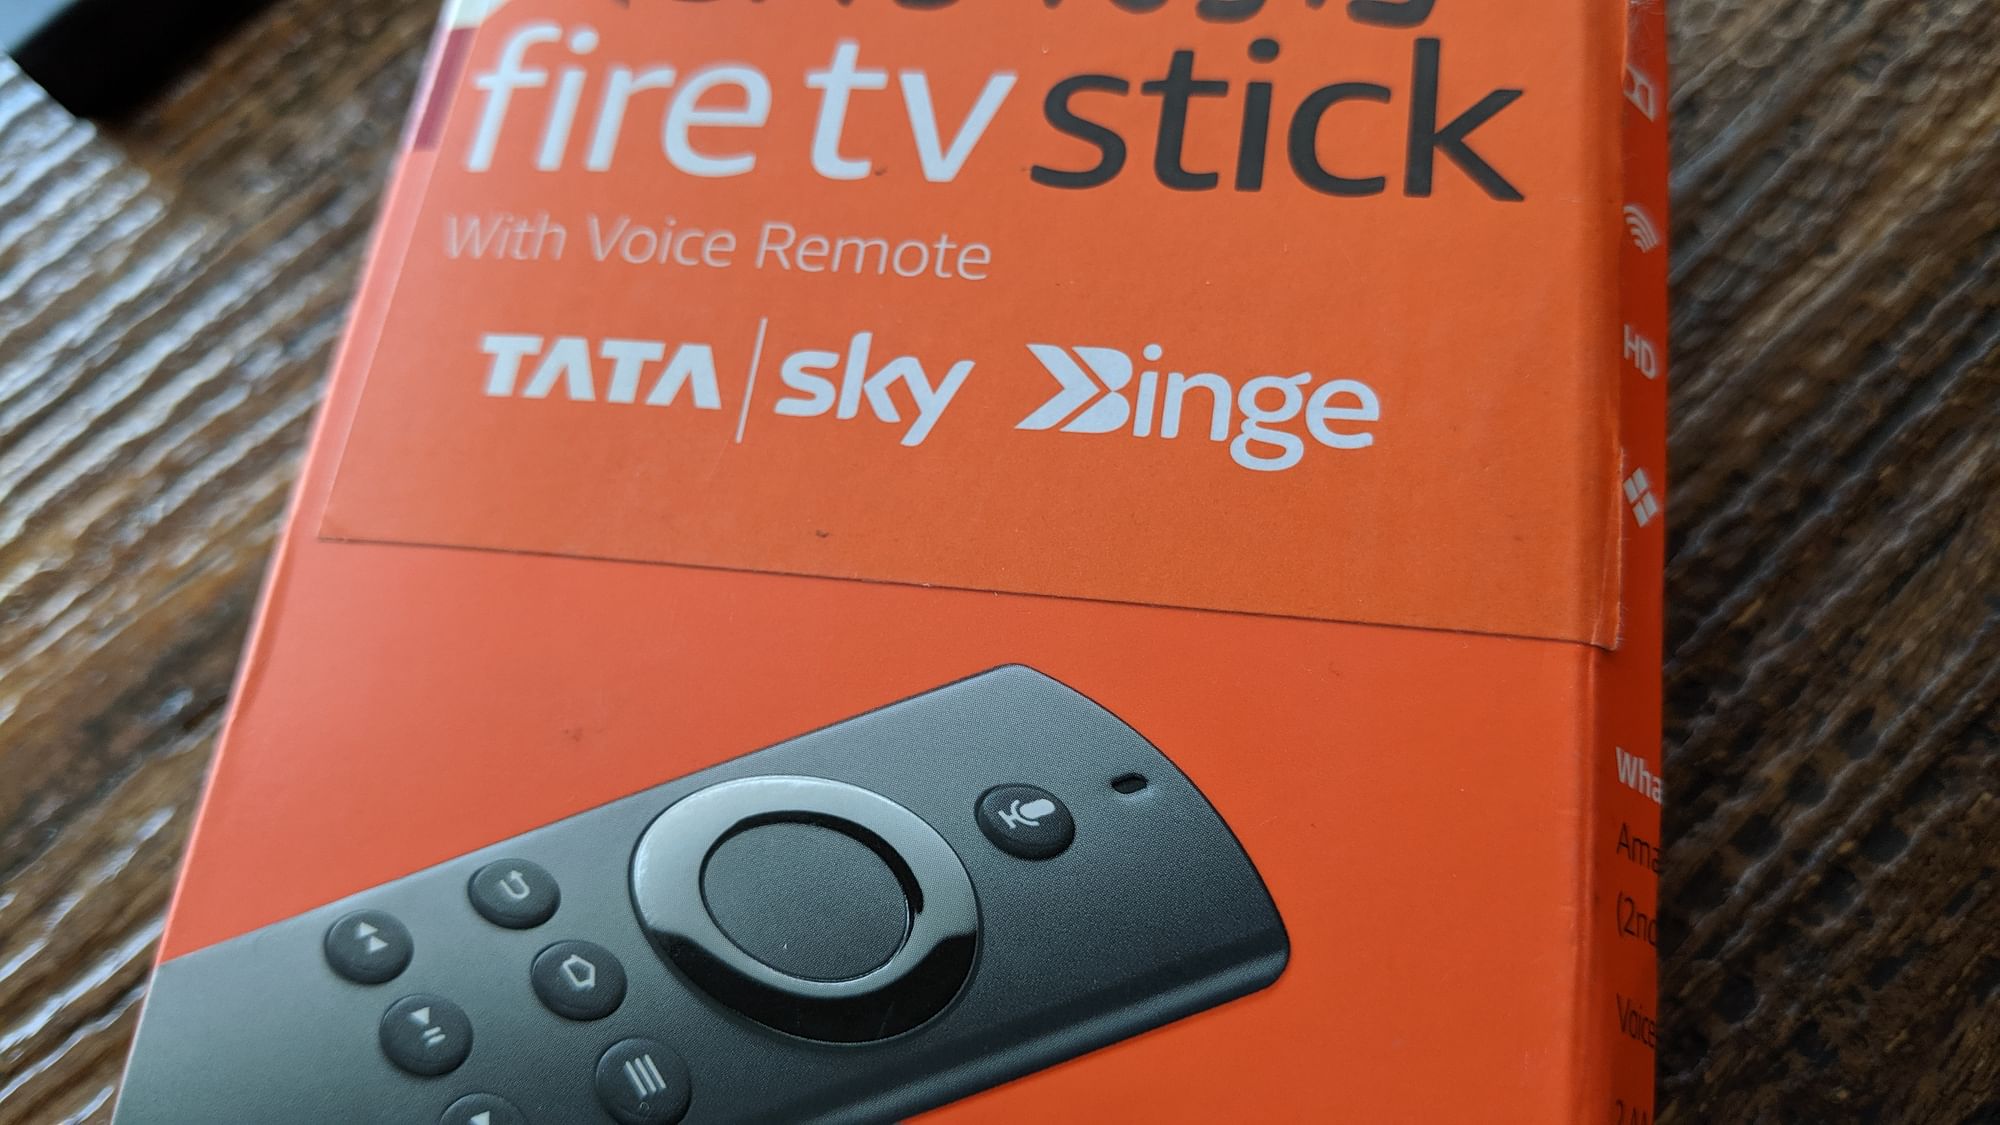 Tata Sky service with access to OTT apps is the latest attempt from the company.